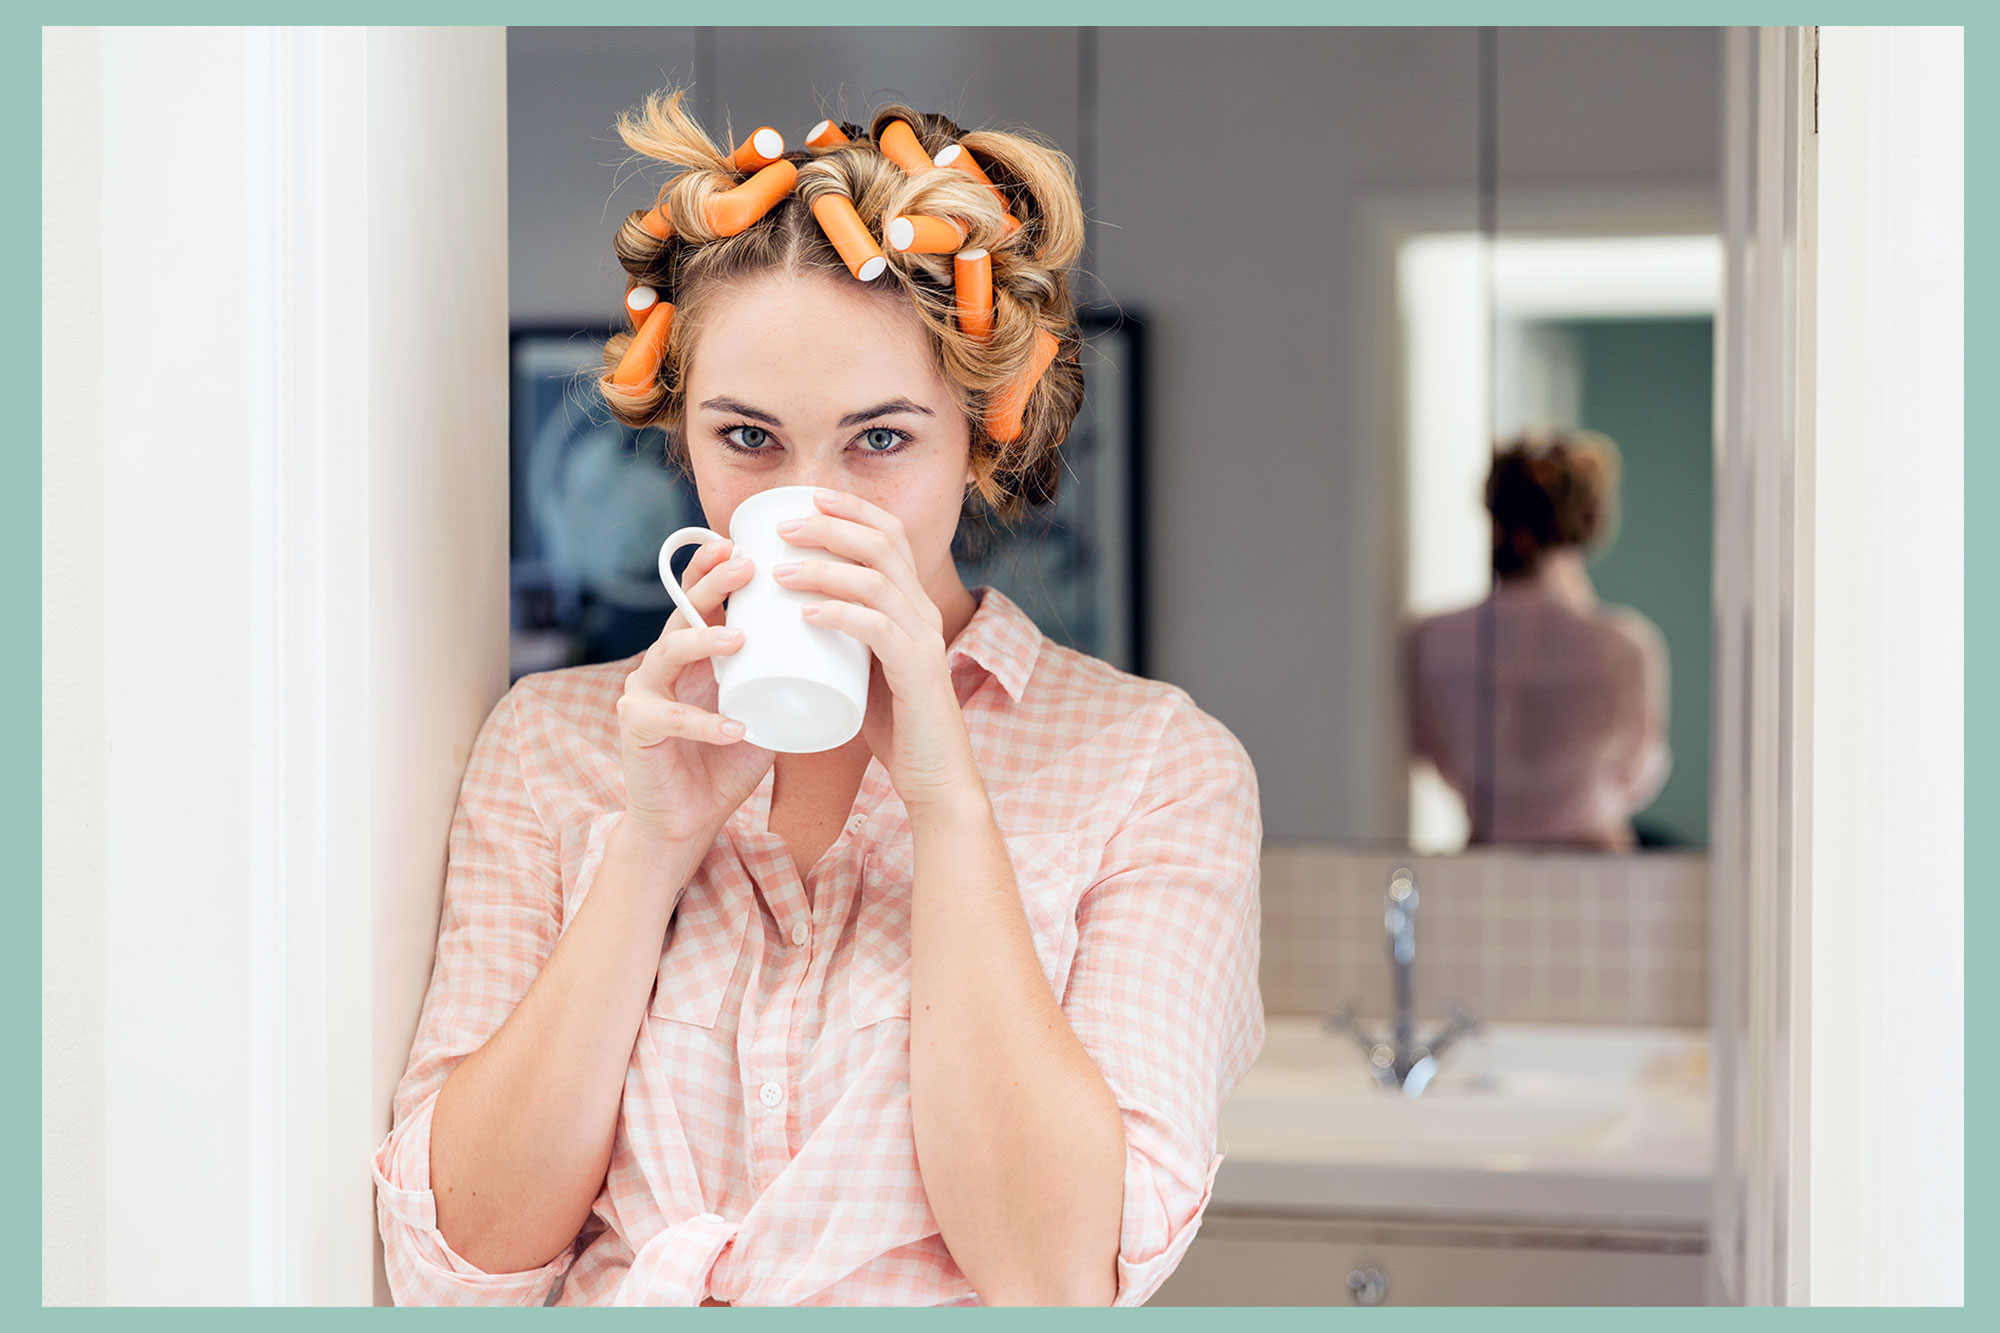 Portrait of young woman with curlers in hair drinking coffee